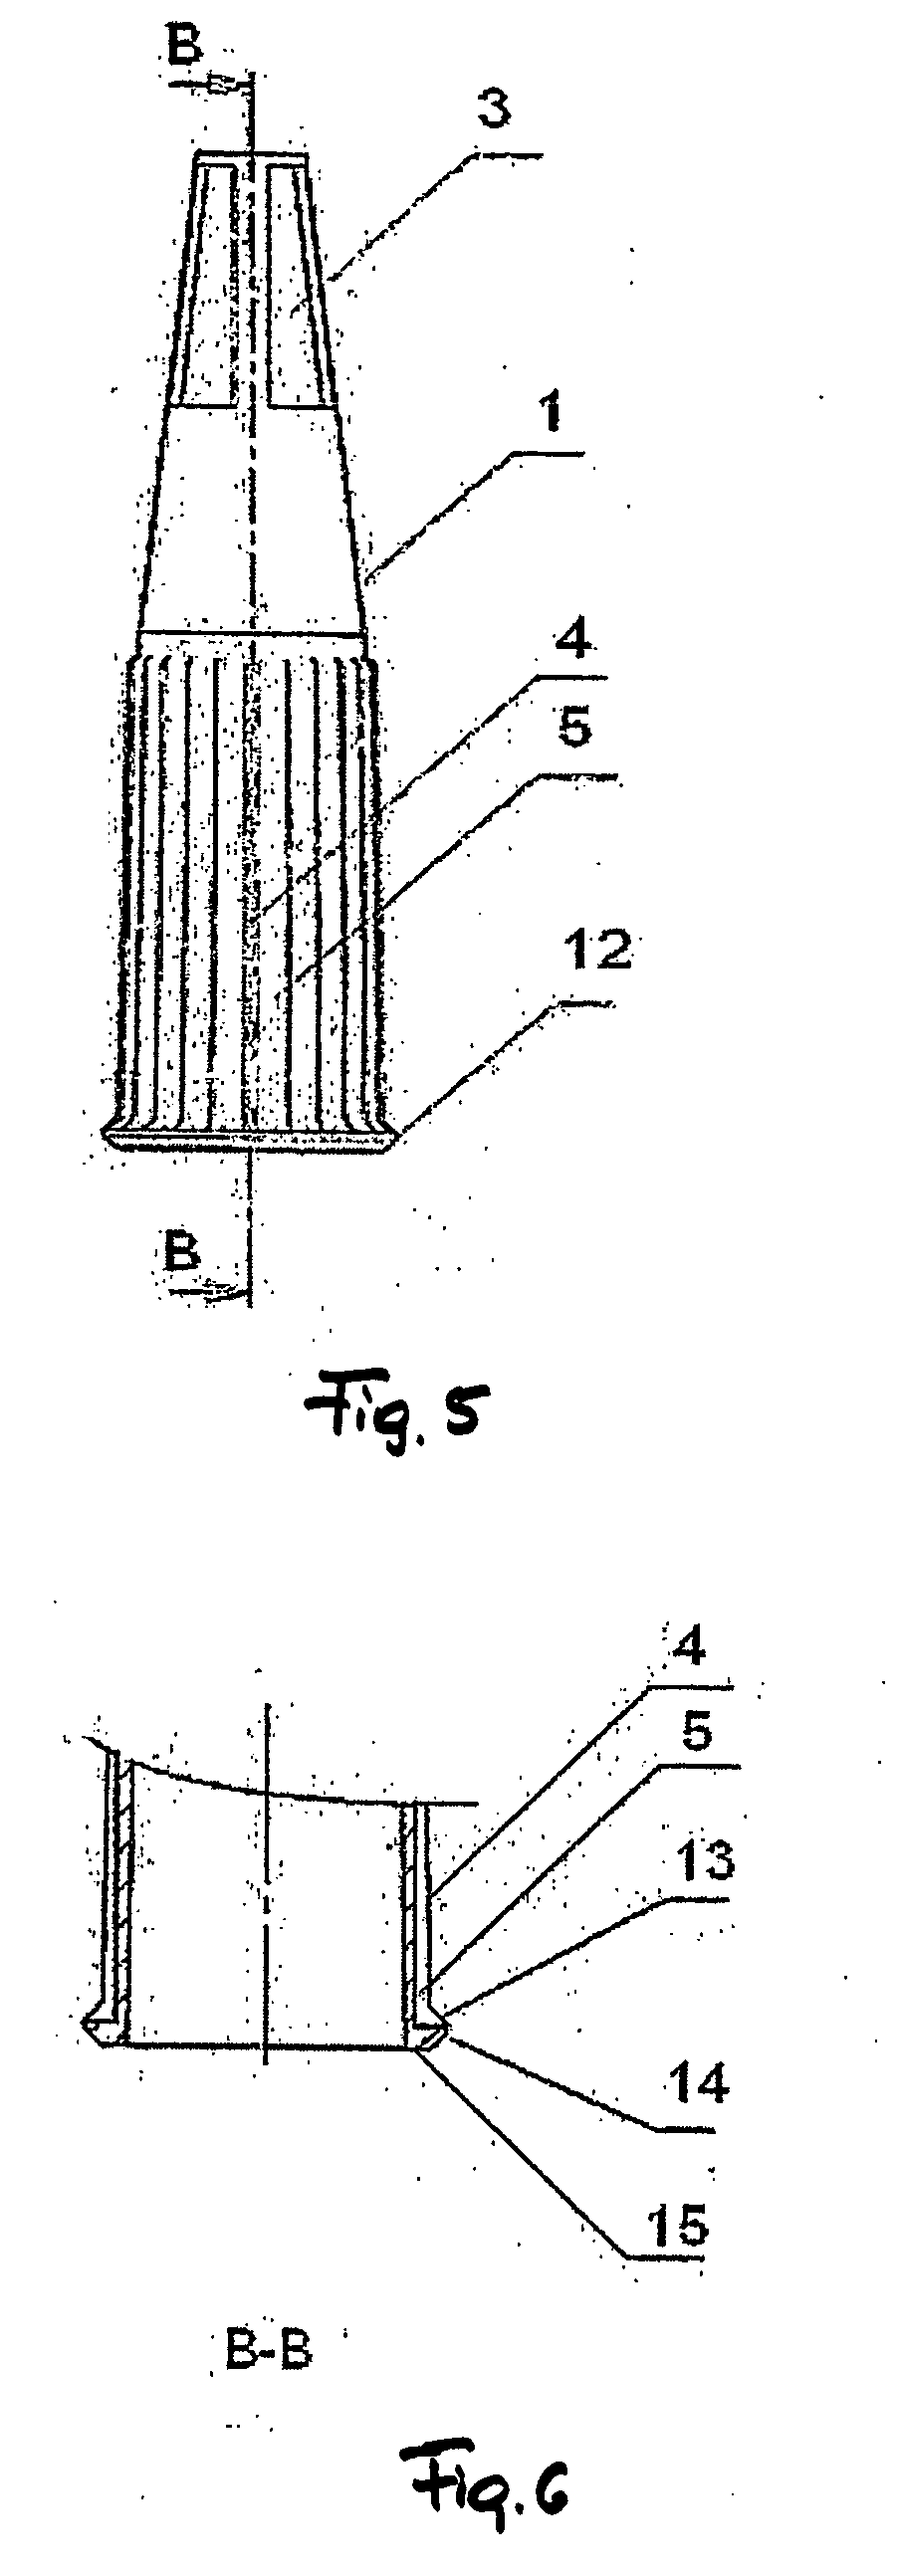 Device and composition for blowing a soap bubble